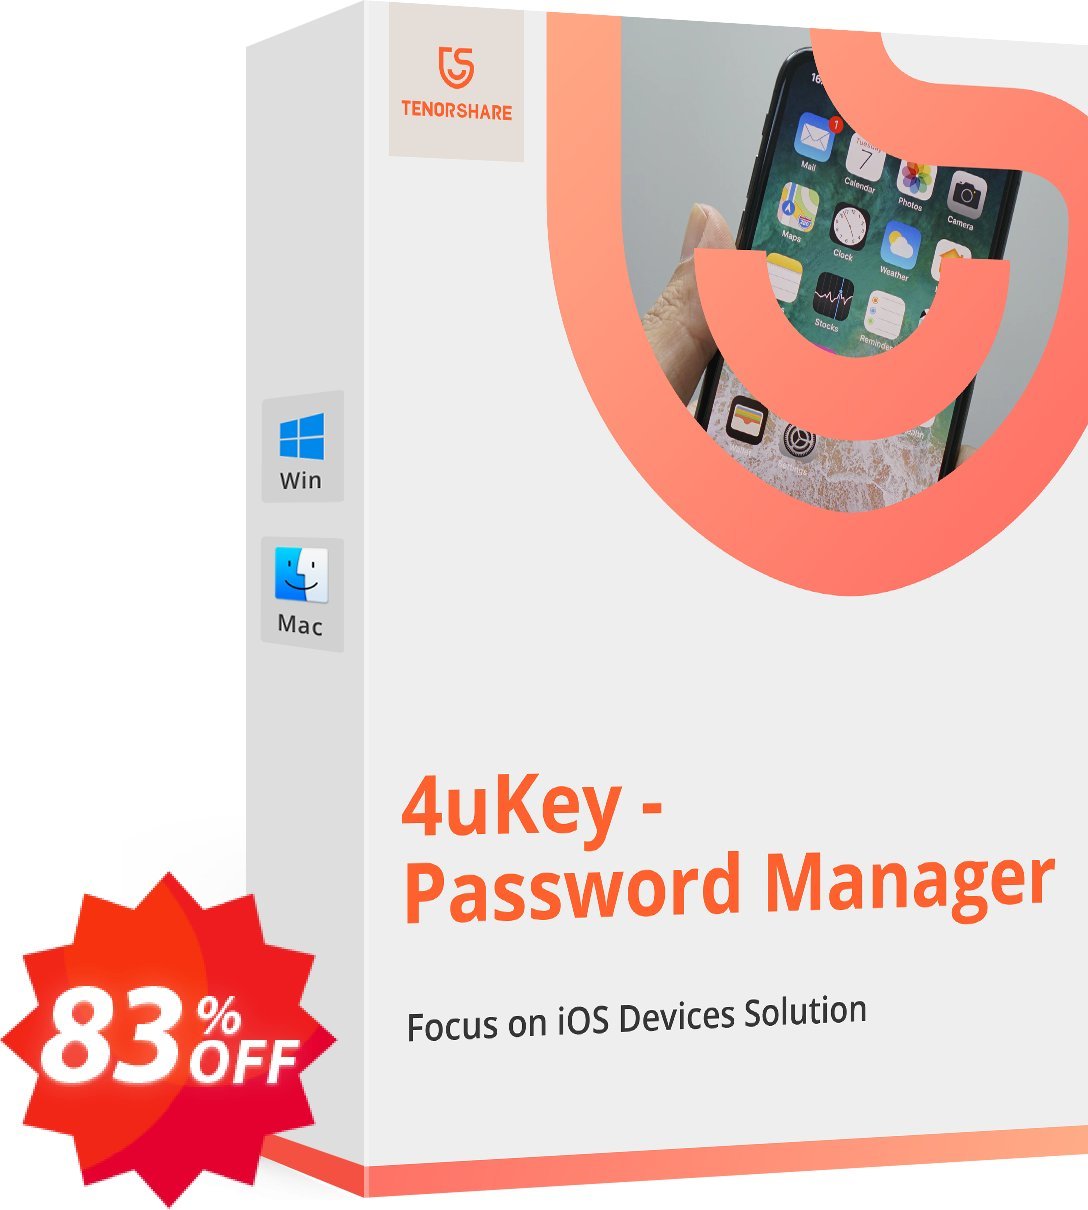 Tenorshare 4uKey Password Manager for MAC, Monthly  Coupon code 83% discount 